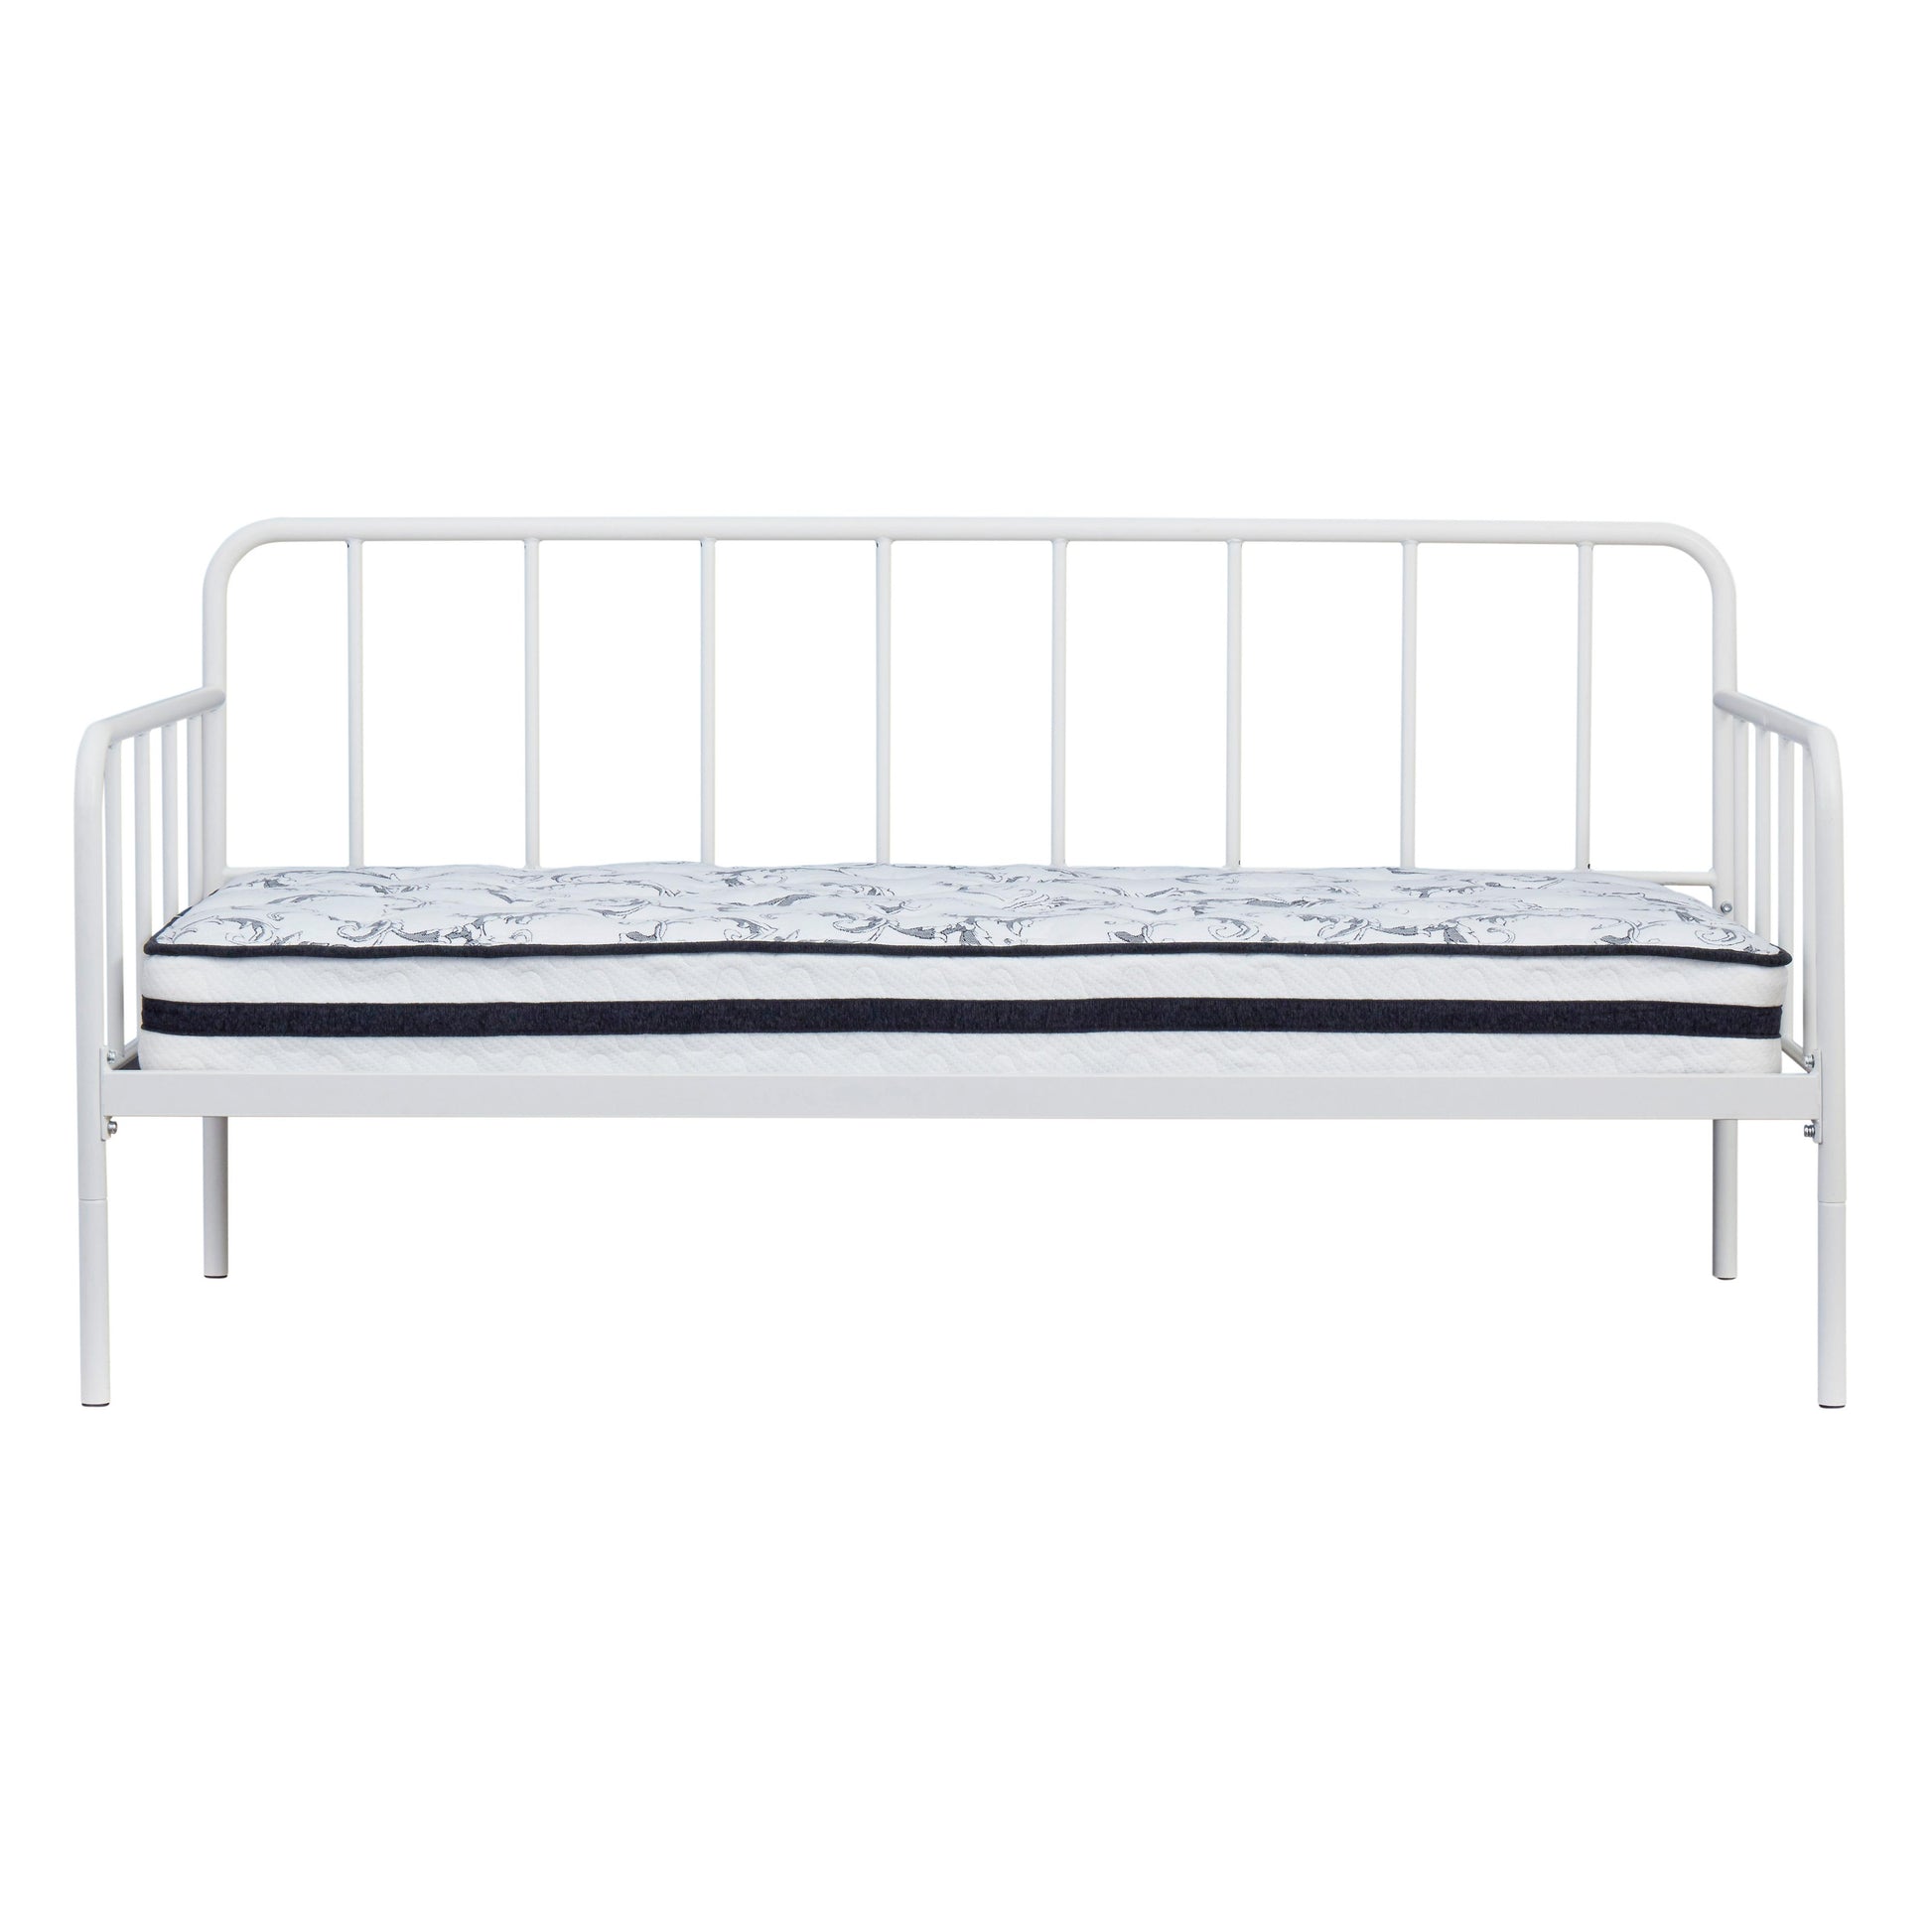 Signature Design by Ashley Trentlore Twin Daybed B076-280 IMAGE 2